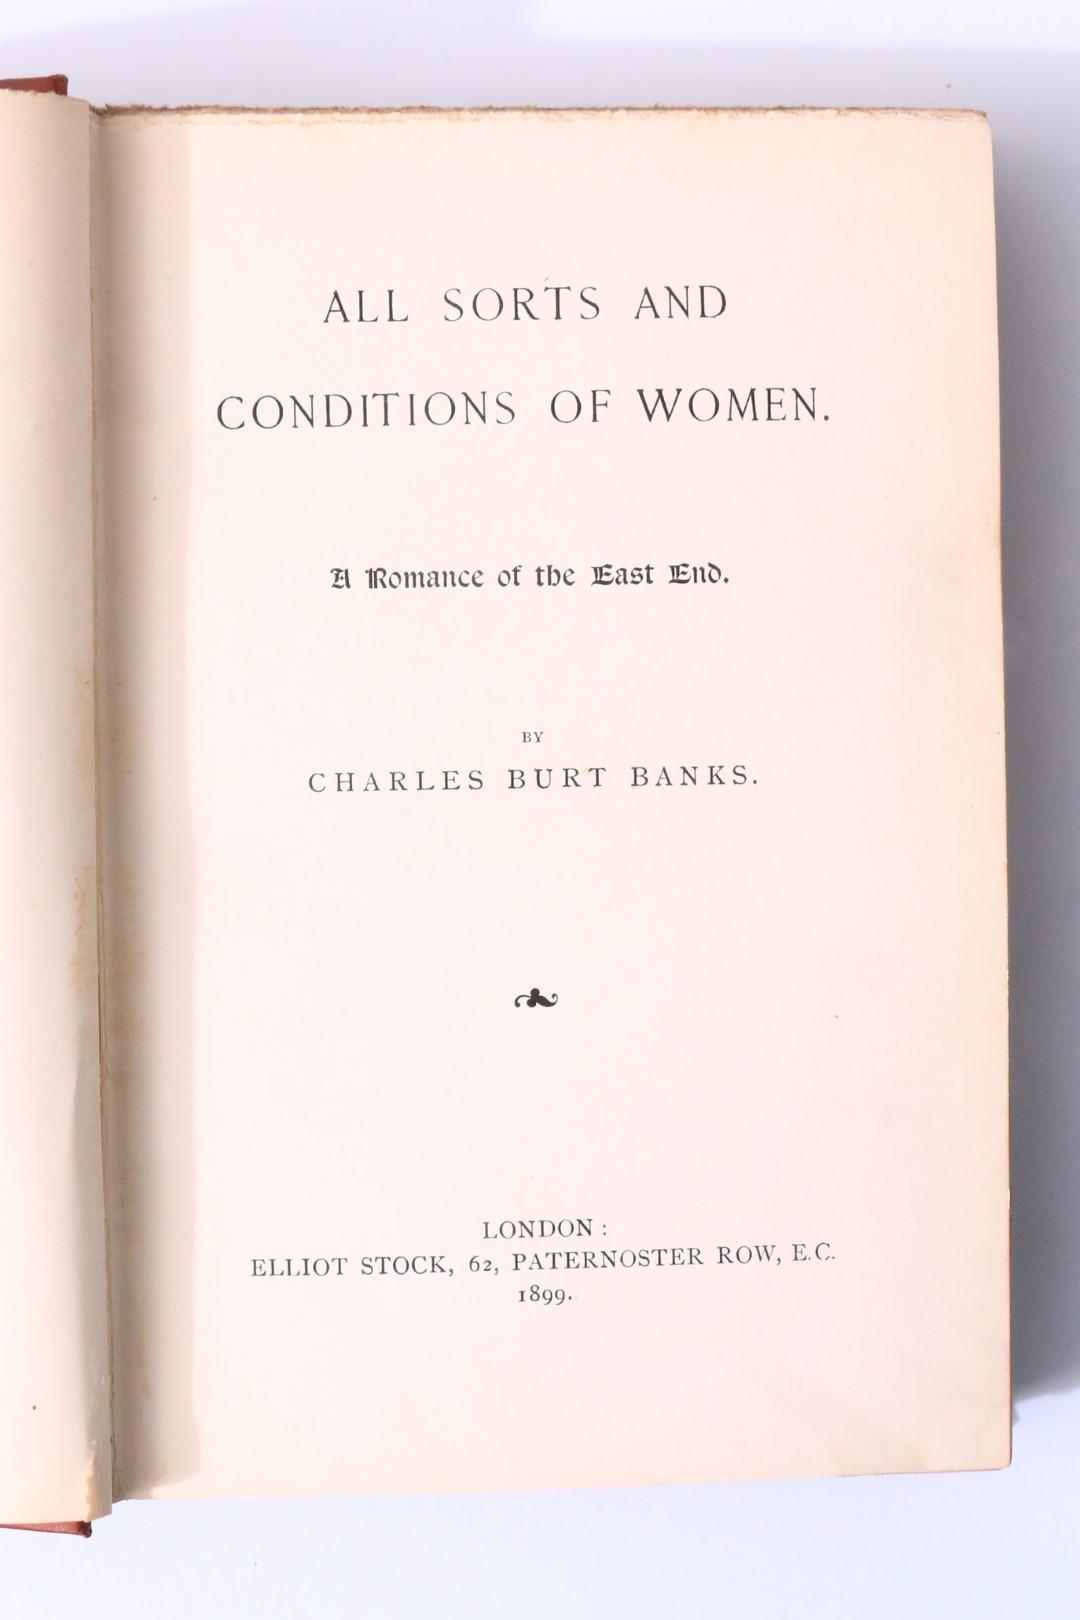 Charles Burt Banks - All Sorts and Conditions of Women: A Romance of the East End - Elliot Stock, 1899, First Edition.